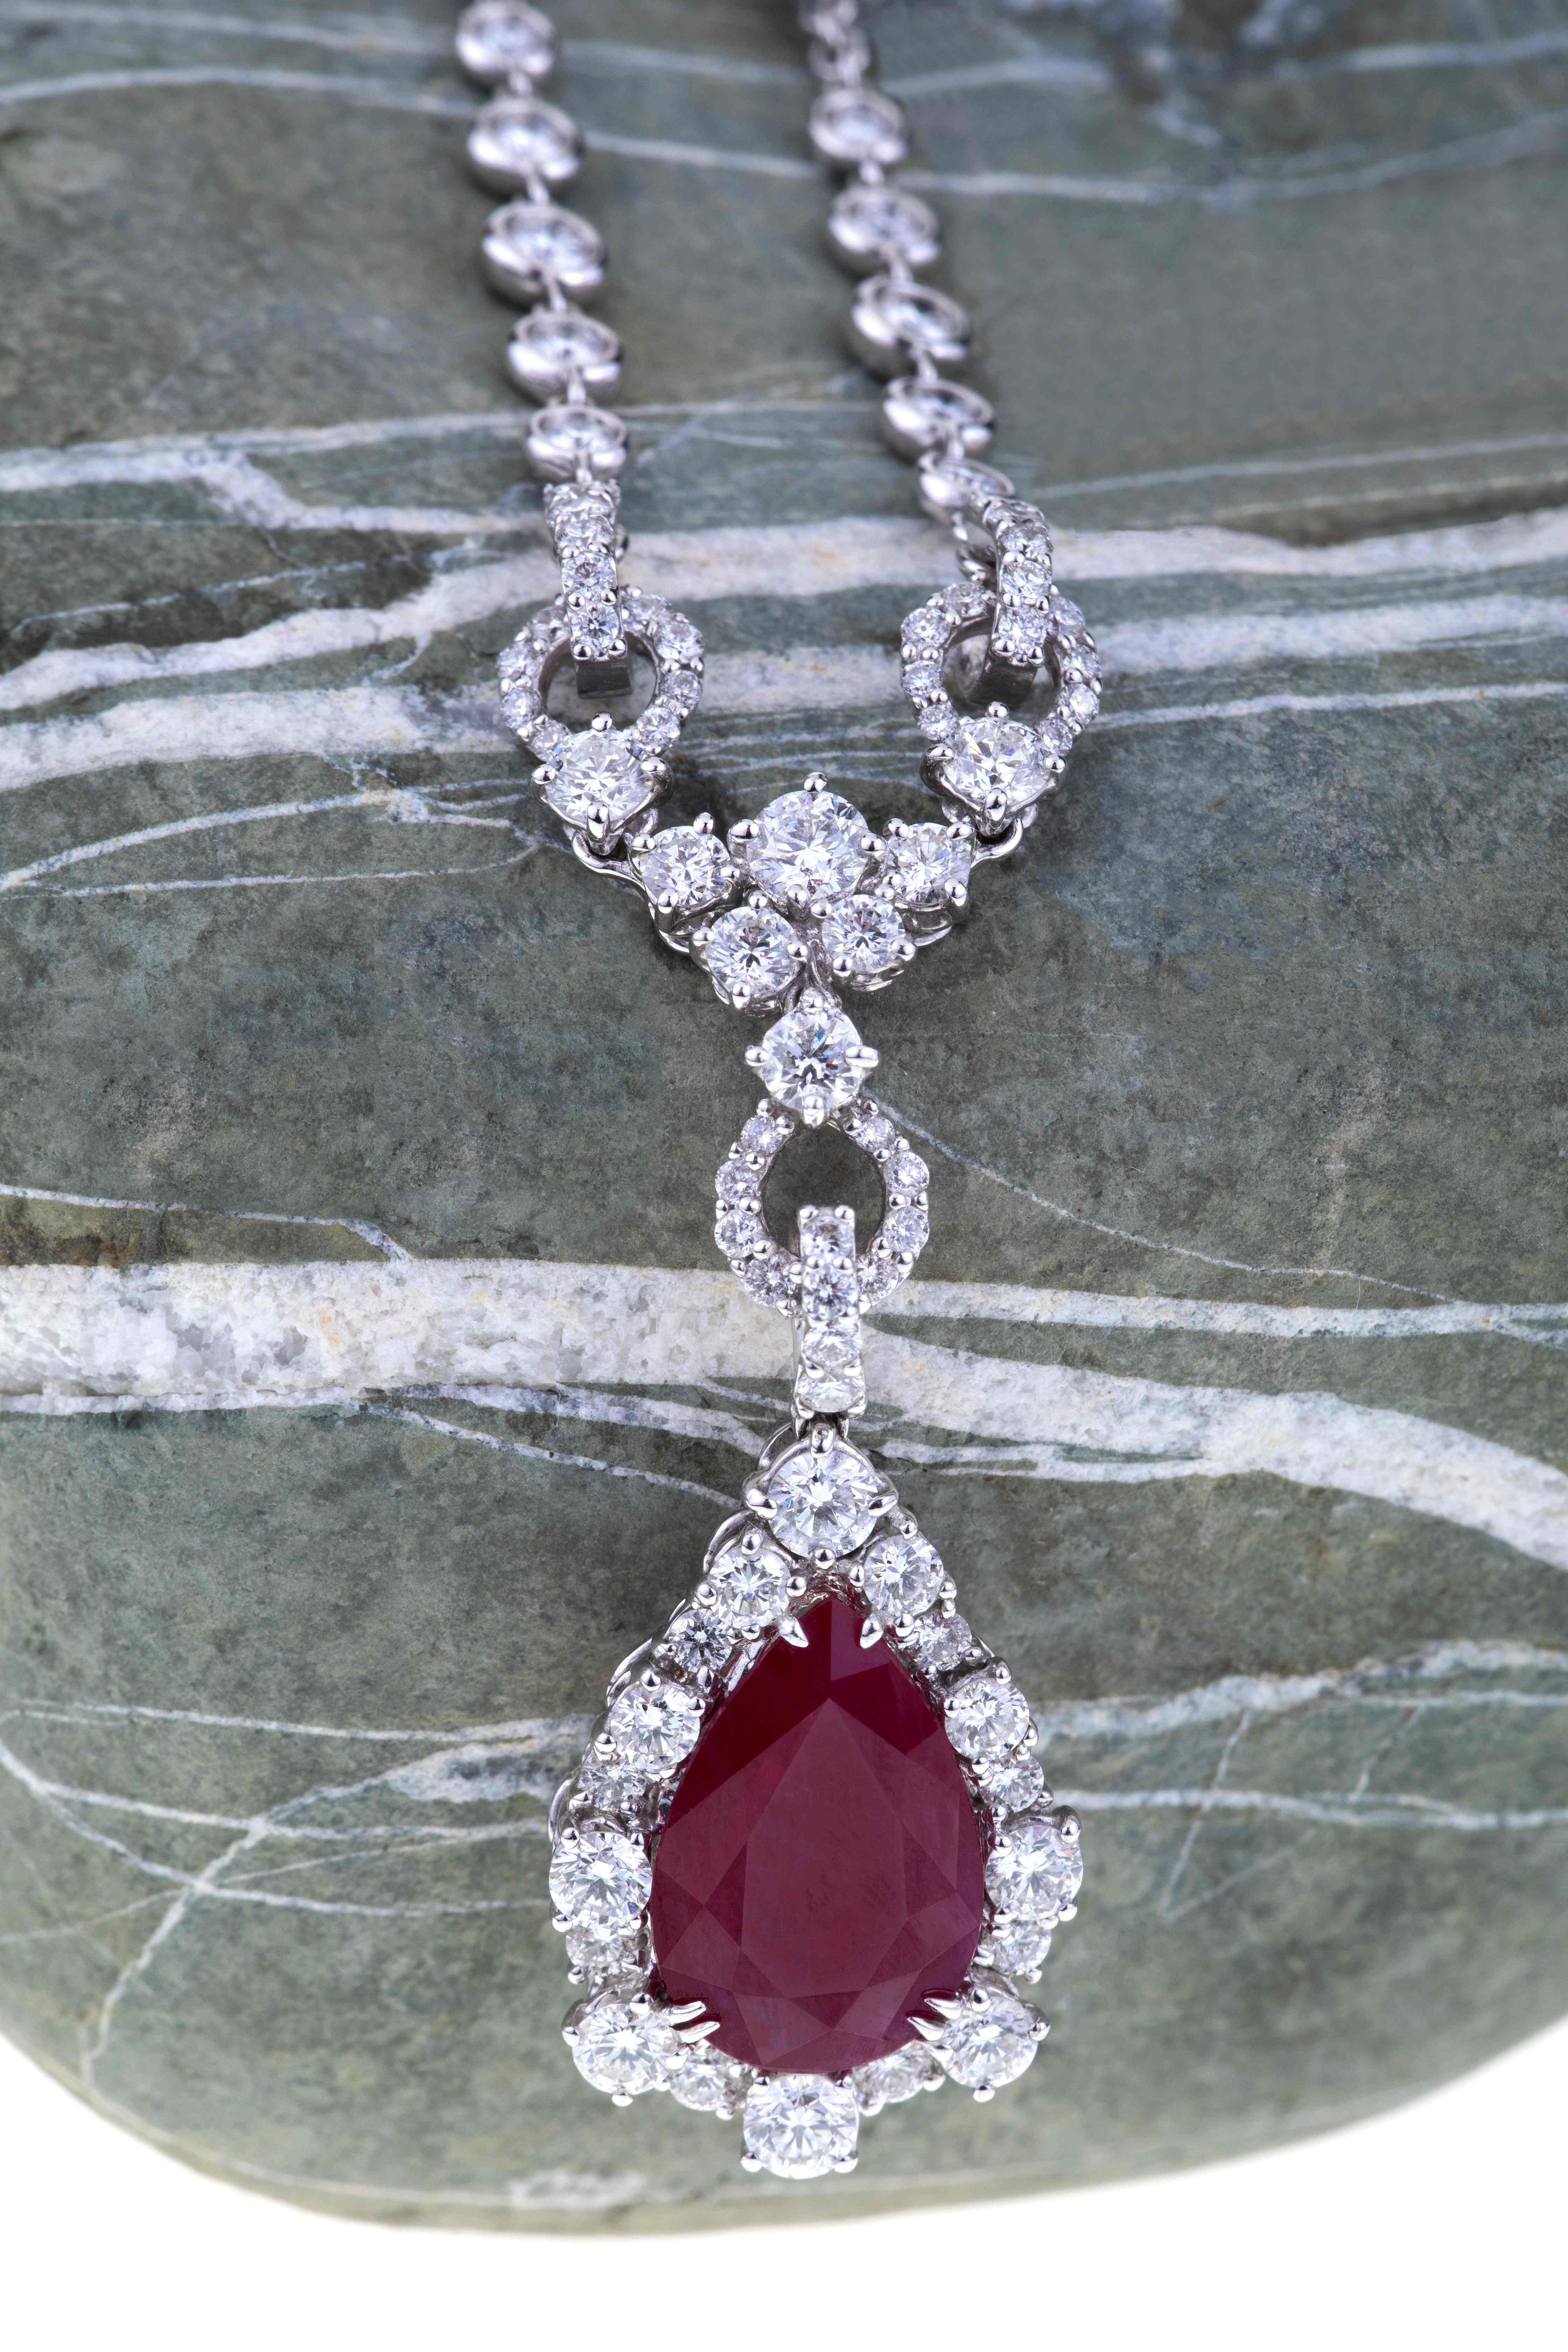 Contemporary Pendant Drop Cut Ruby ct. 3.57, Diamonds Setting like a Royal Blood For Sale